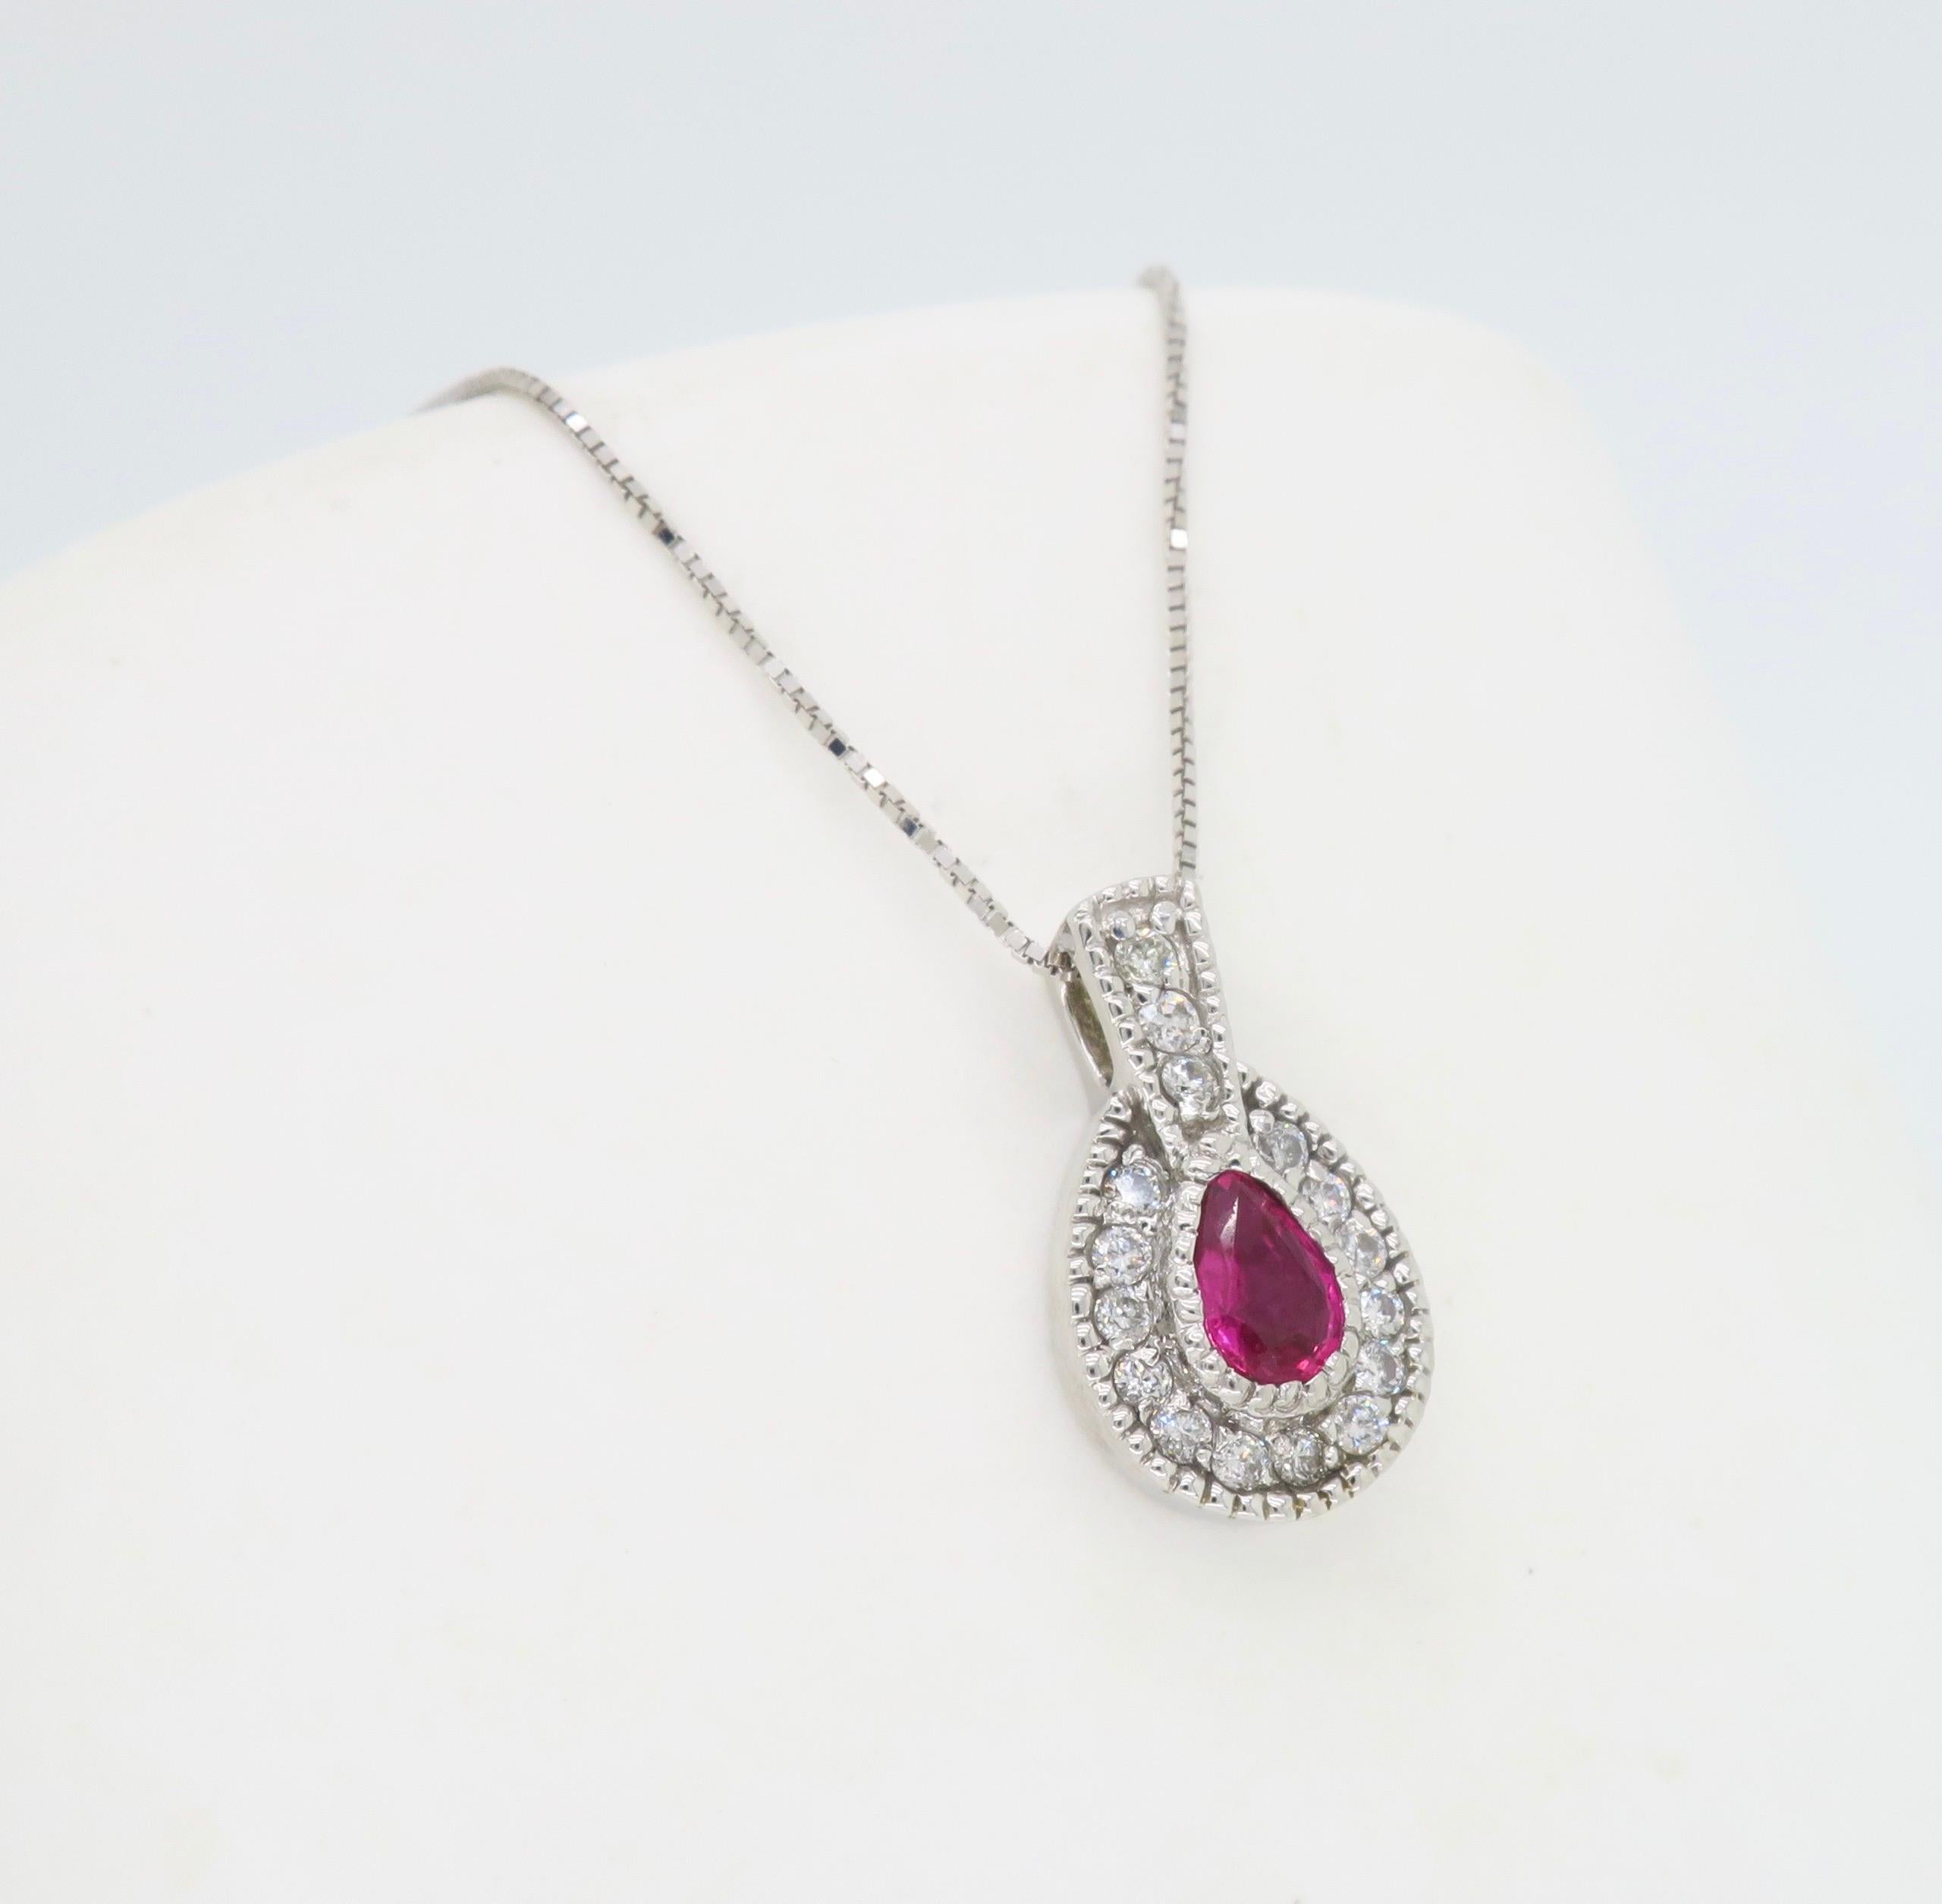 Women's or Men's Pear Shaped Ruby and Diamond Halo Pendant Necklace